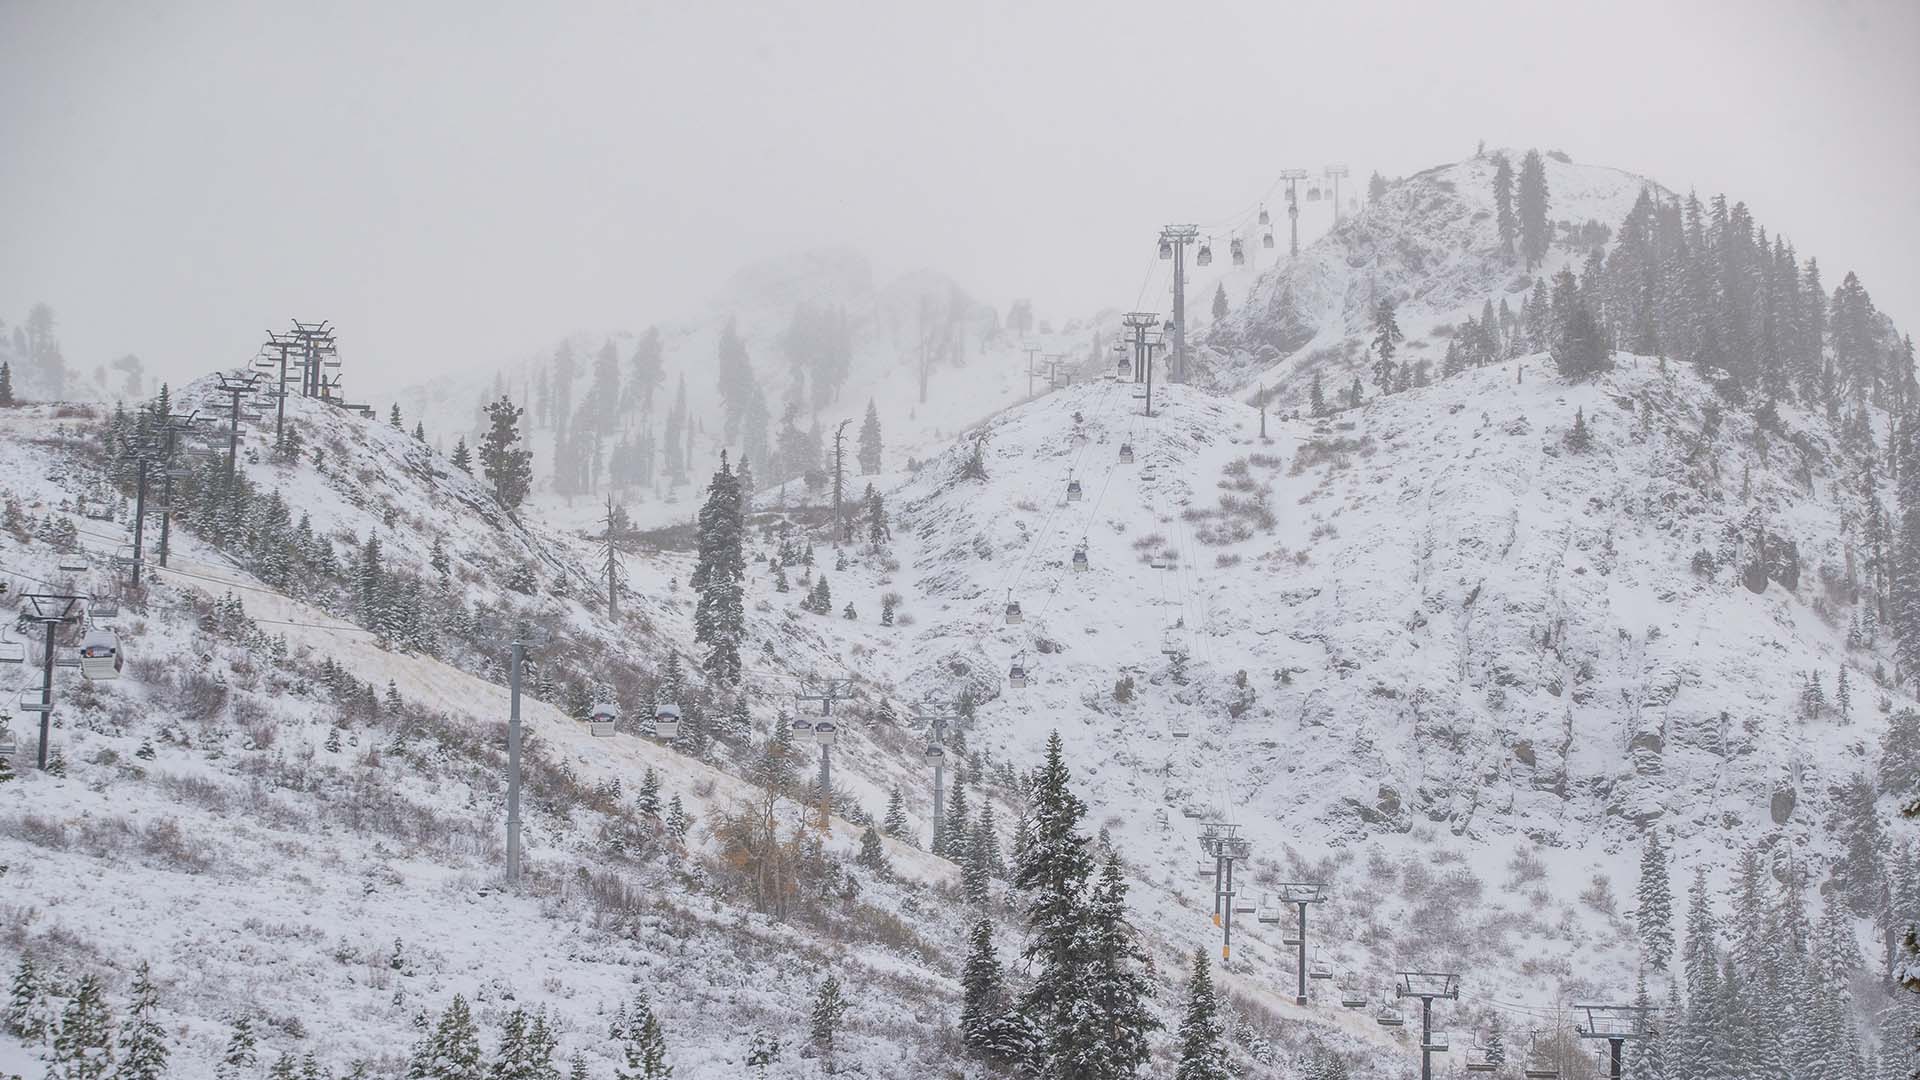 A light blanket of new snow covers KT-22 chairlift at Palisades Tahoe.